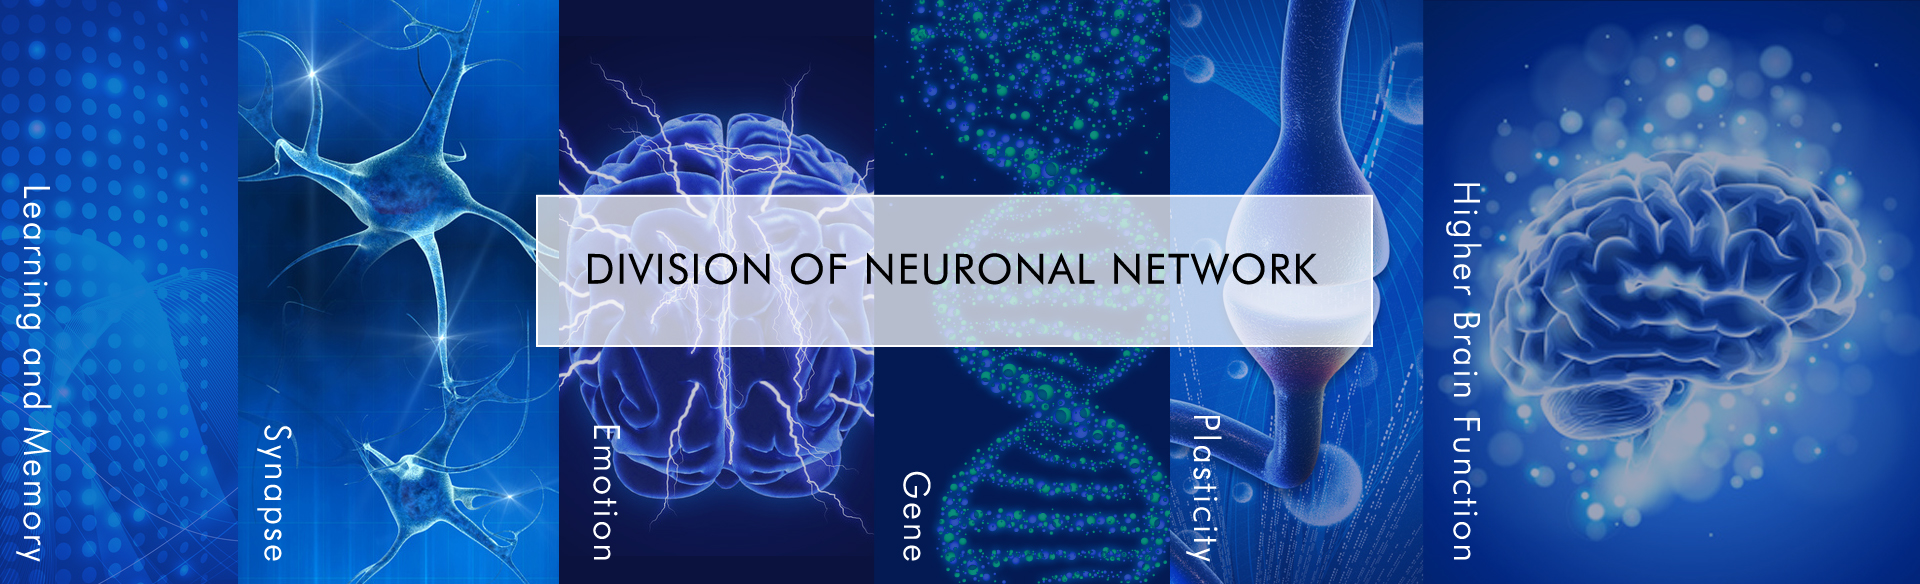 DIVISION OF NEURONAL NETWORK